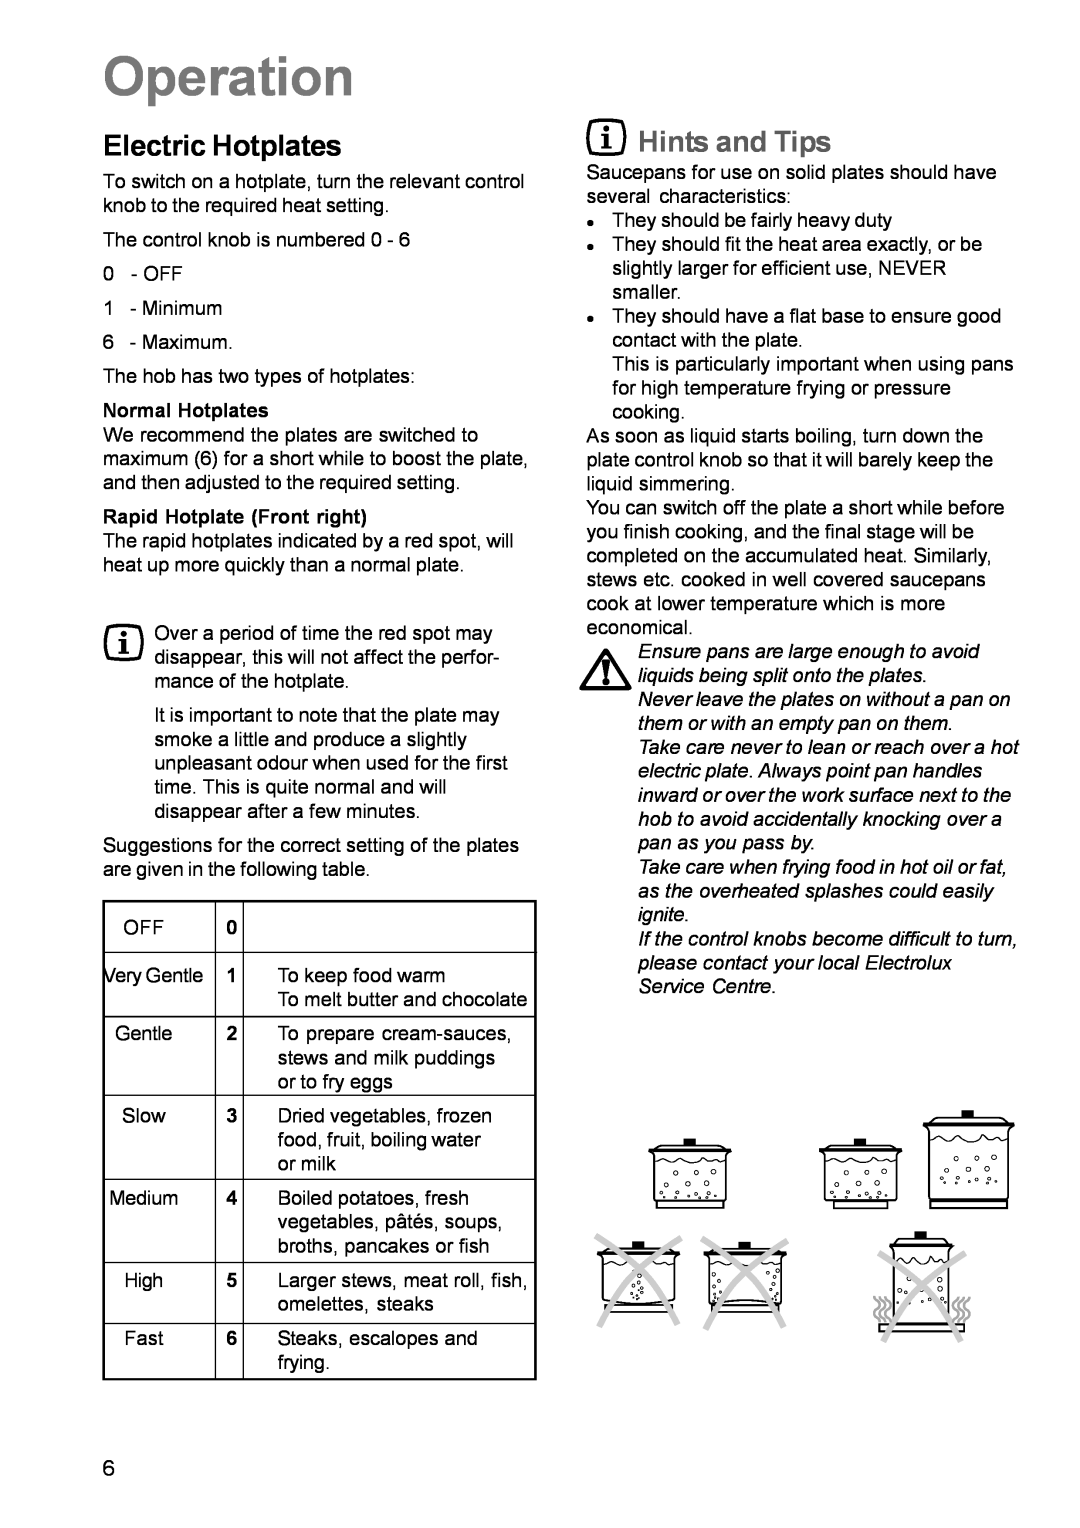 Electrolux EK 5741 manual Operation, Electric Hotplates, Hints and Tips 